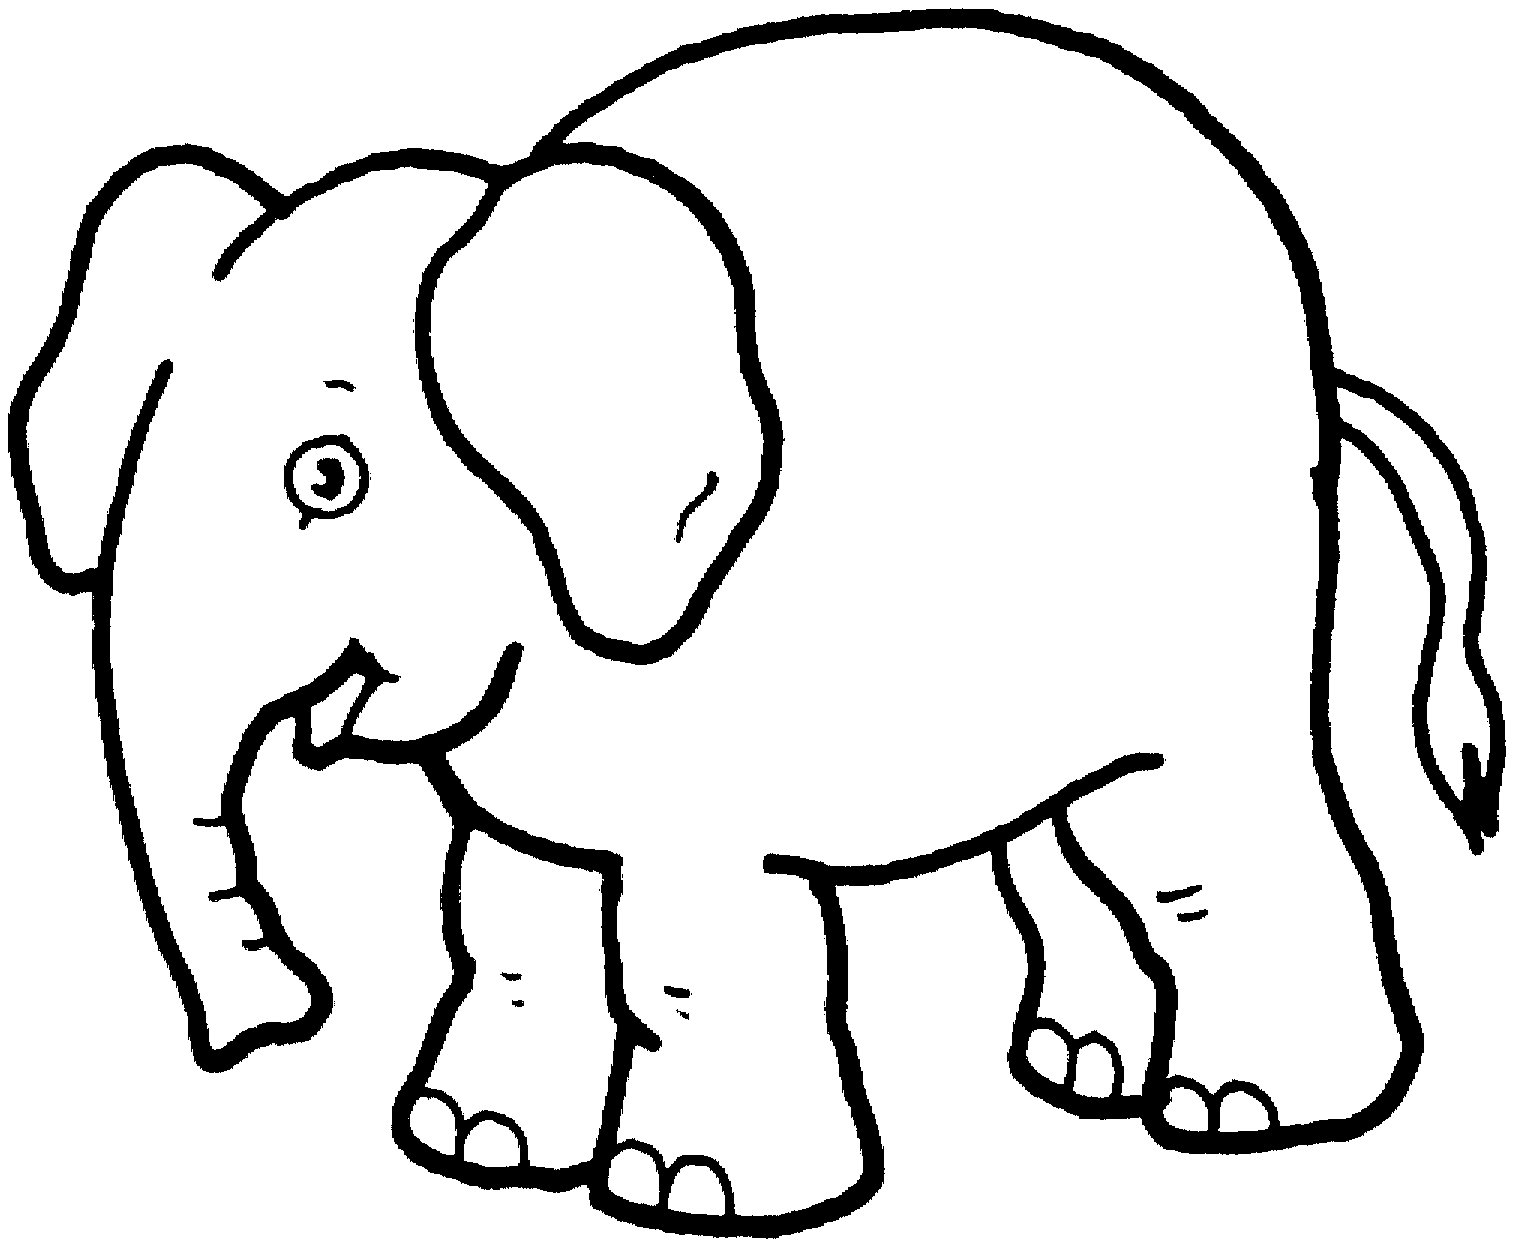 Elephant Clipart Black and White craft projects, Animals Clipart ...